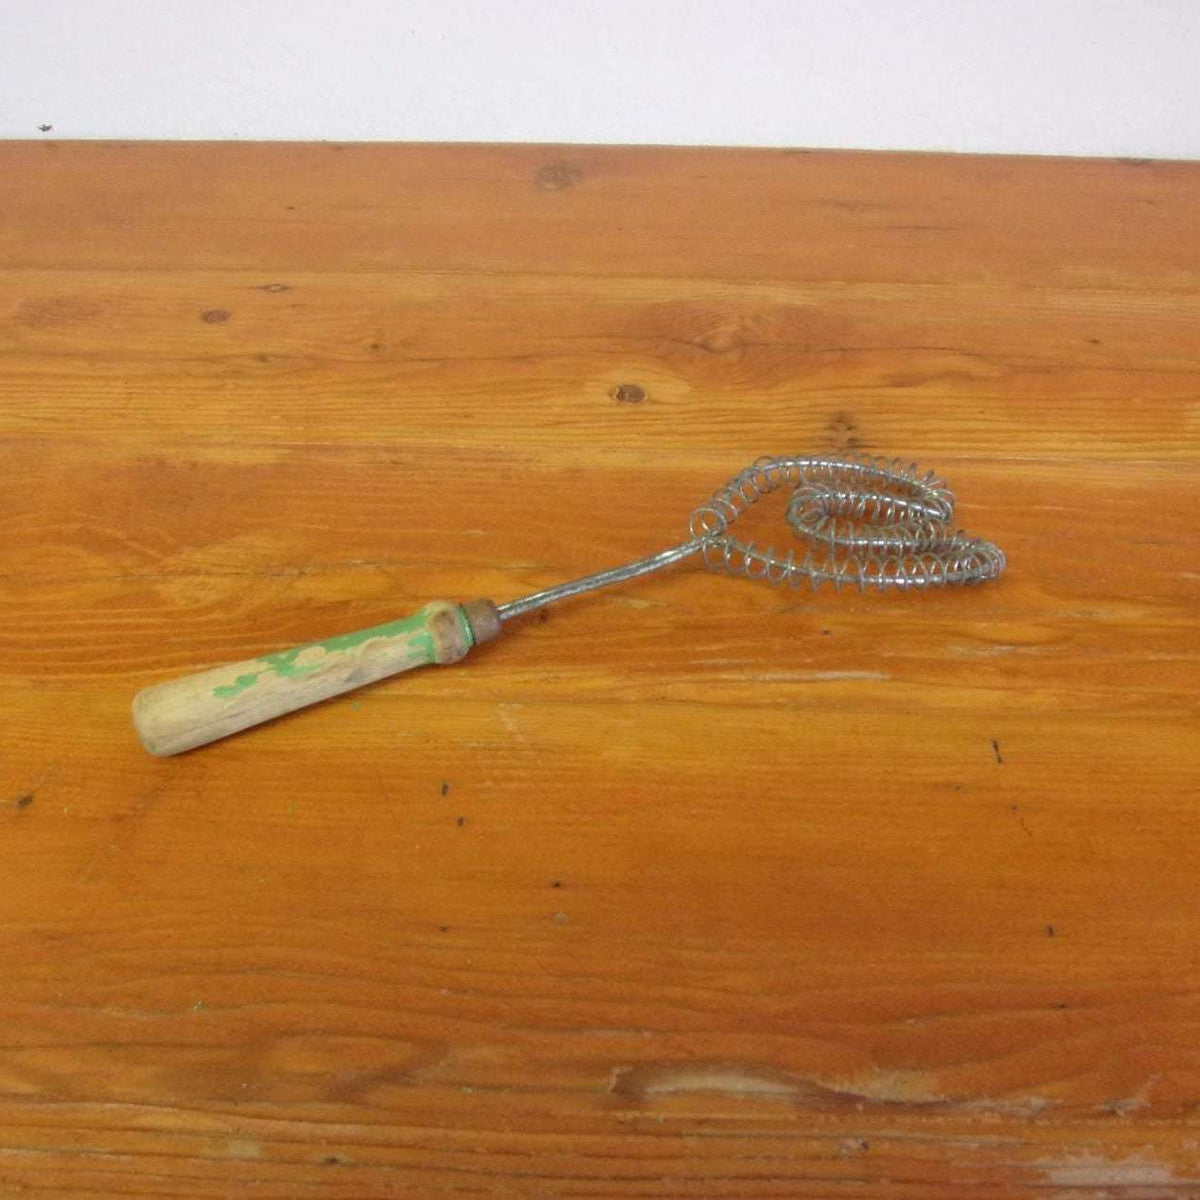 http://maandpasattic.com/cdn/shop/files/antique-wire-whisk-egg-beater-u-shape-with-wood-handle-kitchen-tools-gadgets-ma-and-pas-attic-32293036_1200x1200.jpg?v=1683070588